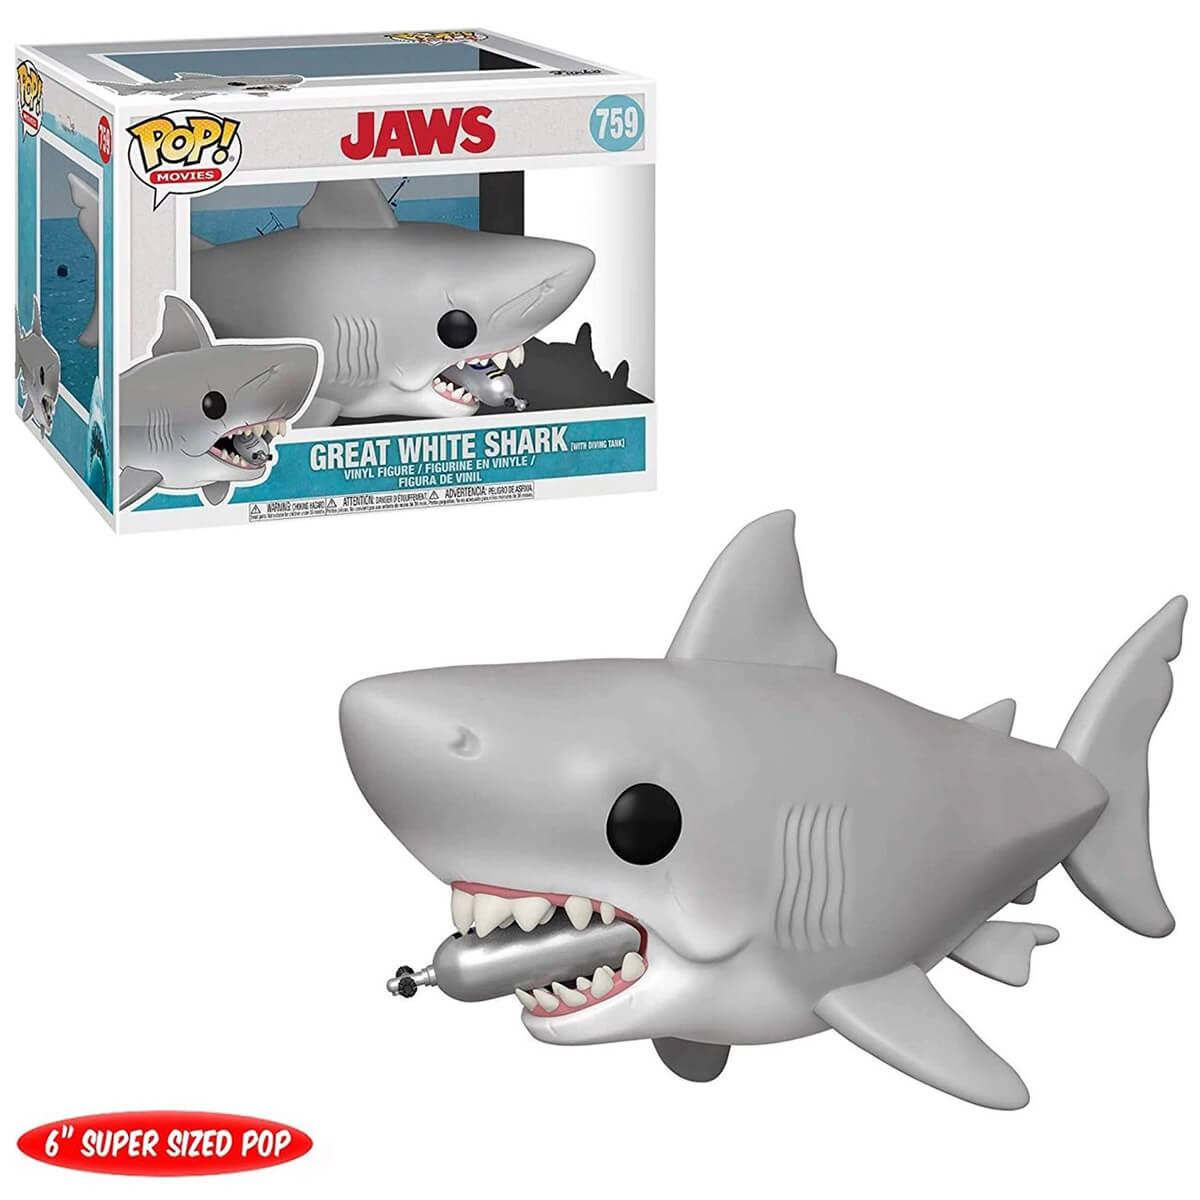 Funko POP Movies Jaws Great White Shark With Diving Tank #759